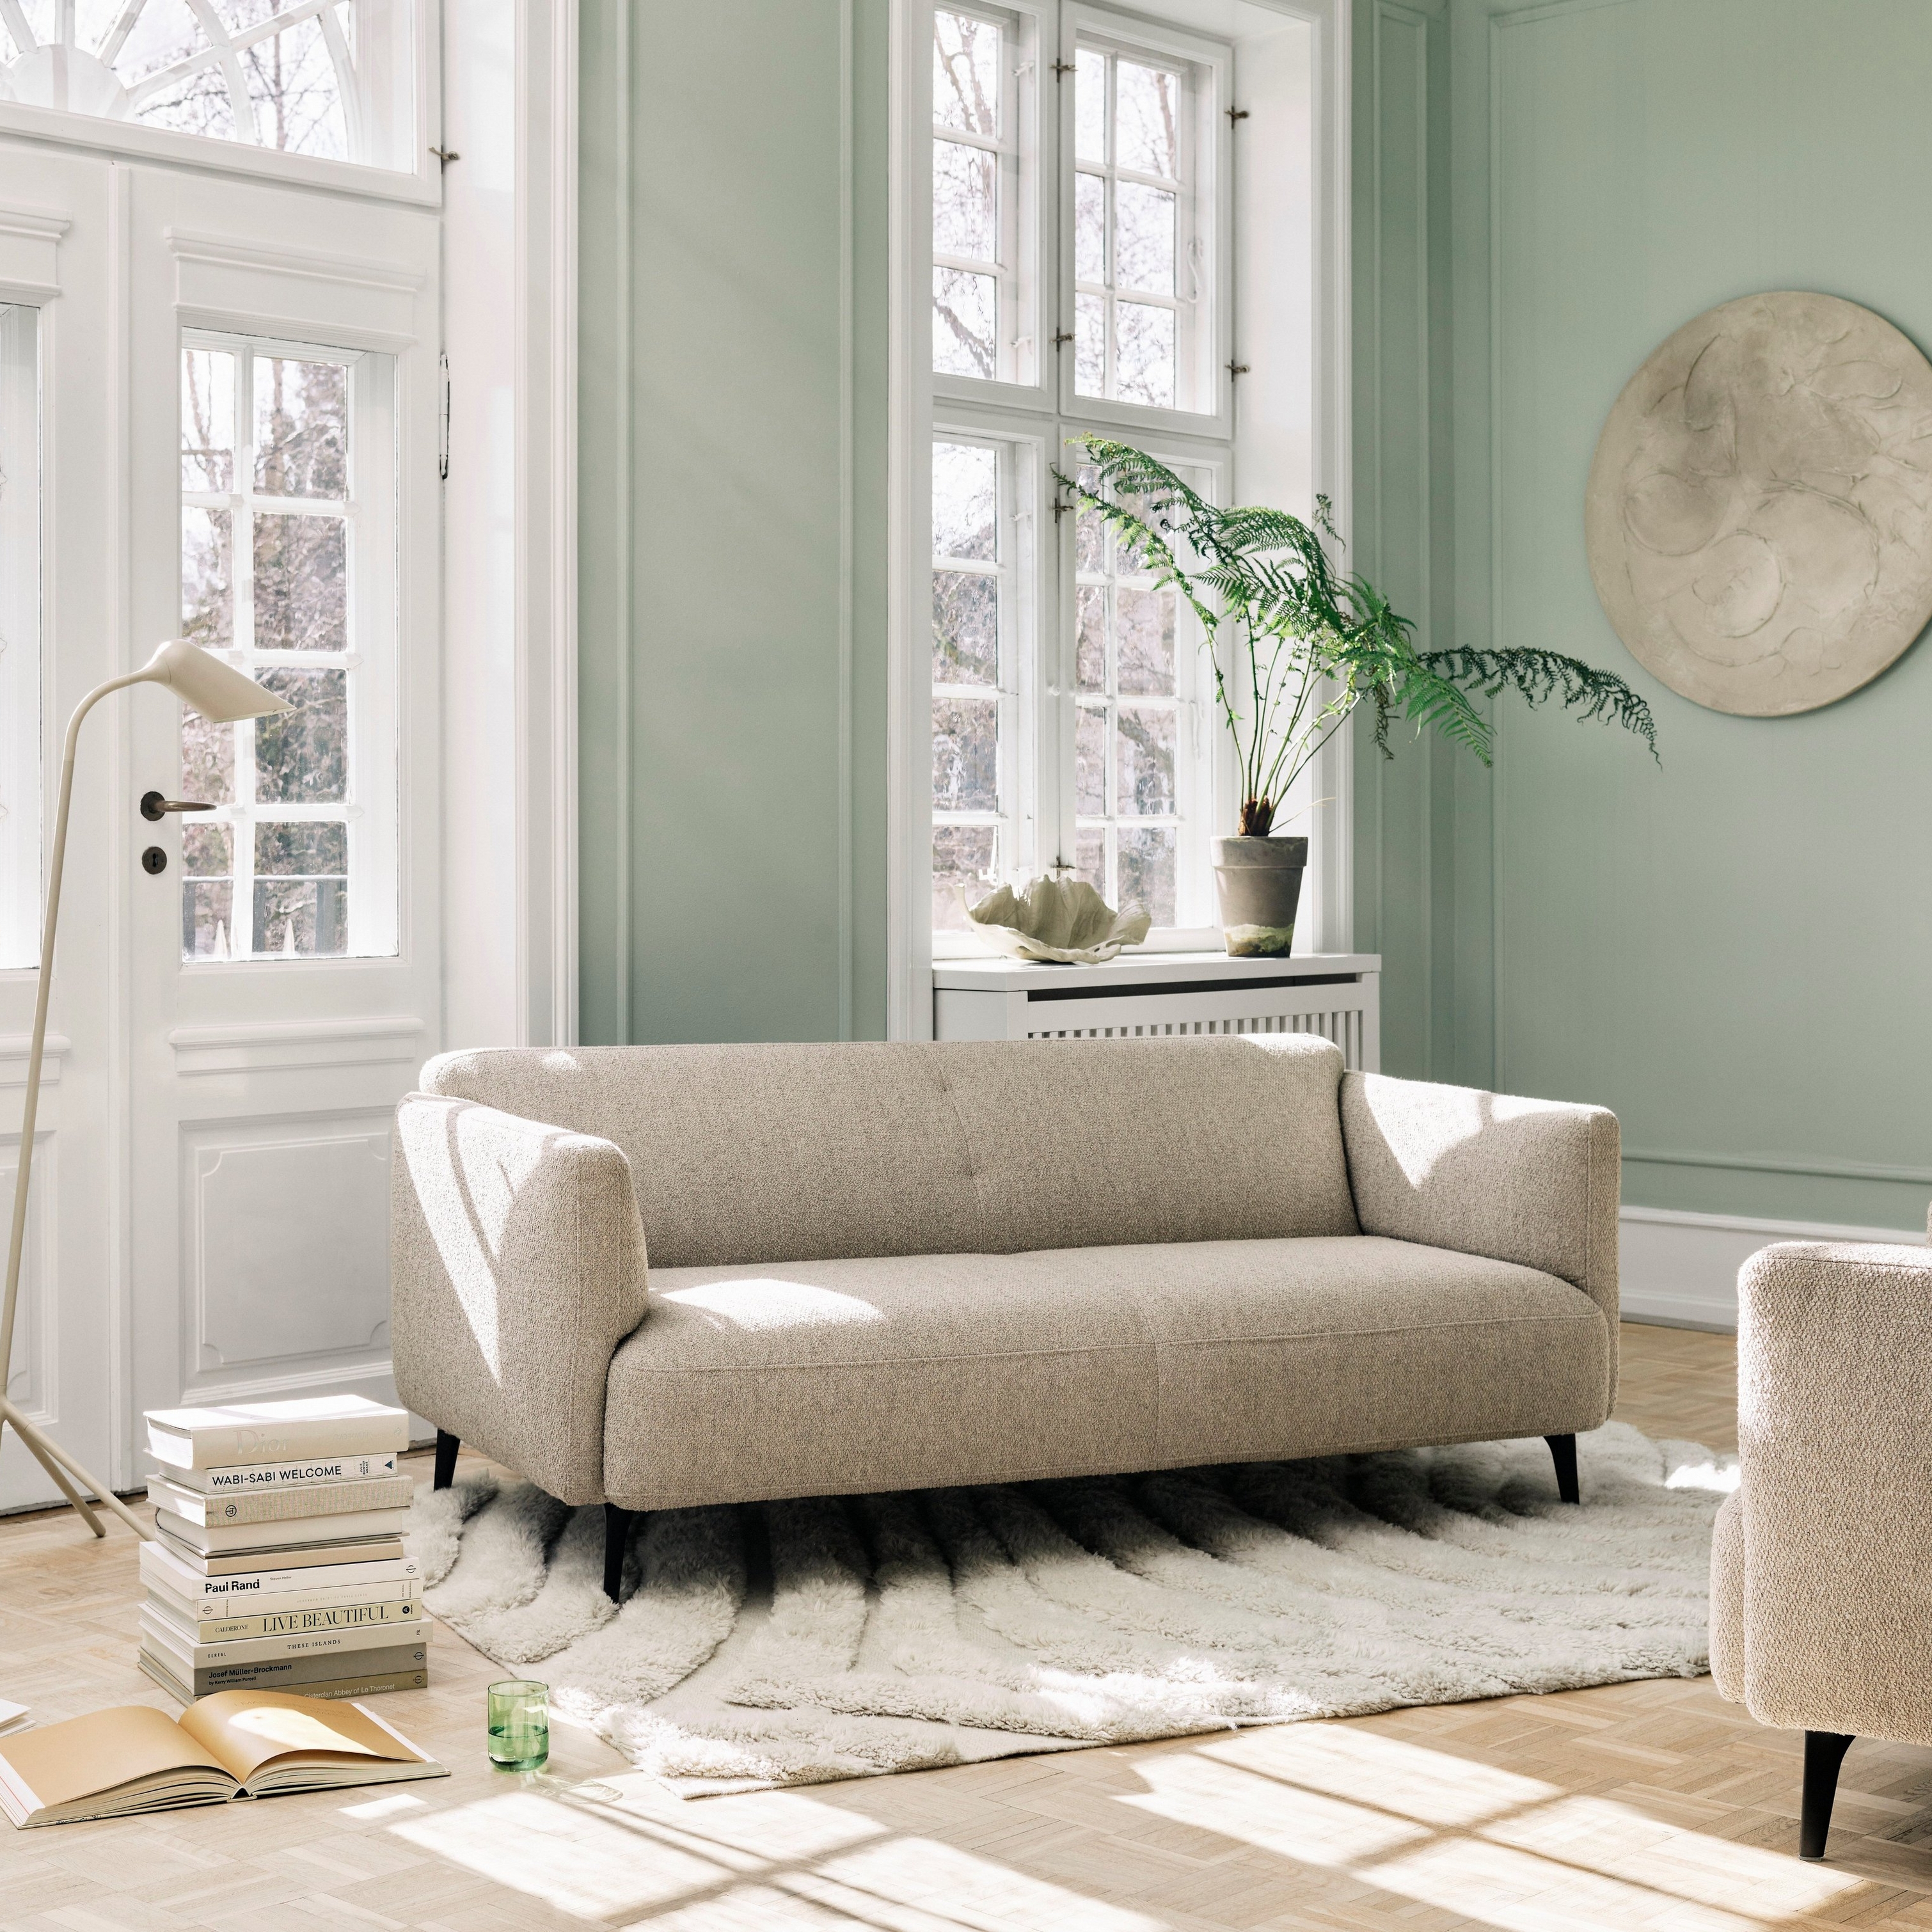 Modern neutral living space featuring the Modena sofa and the Curious floor lamp